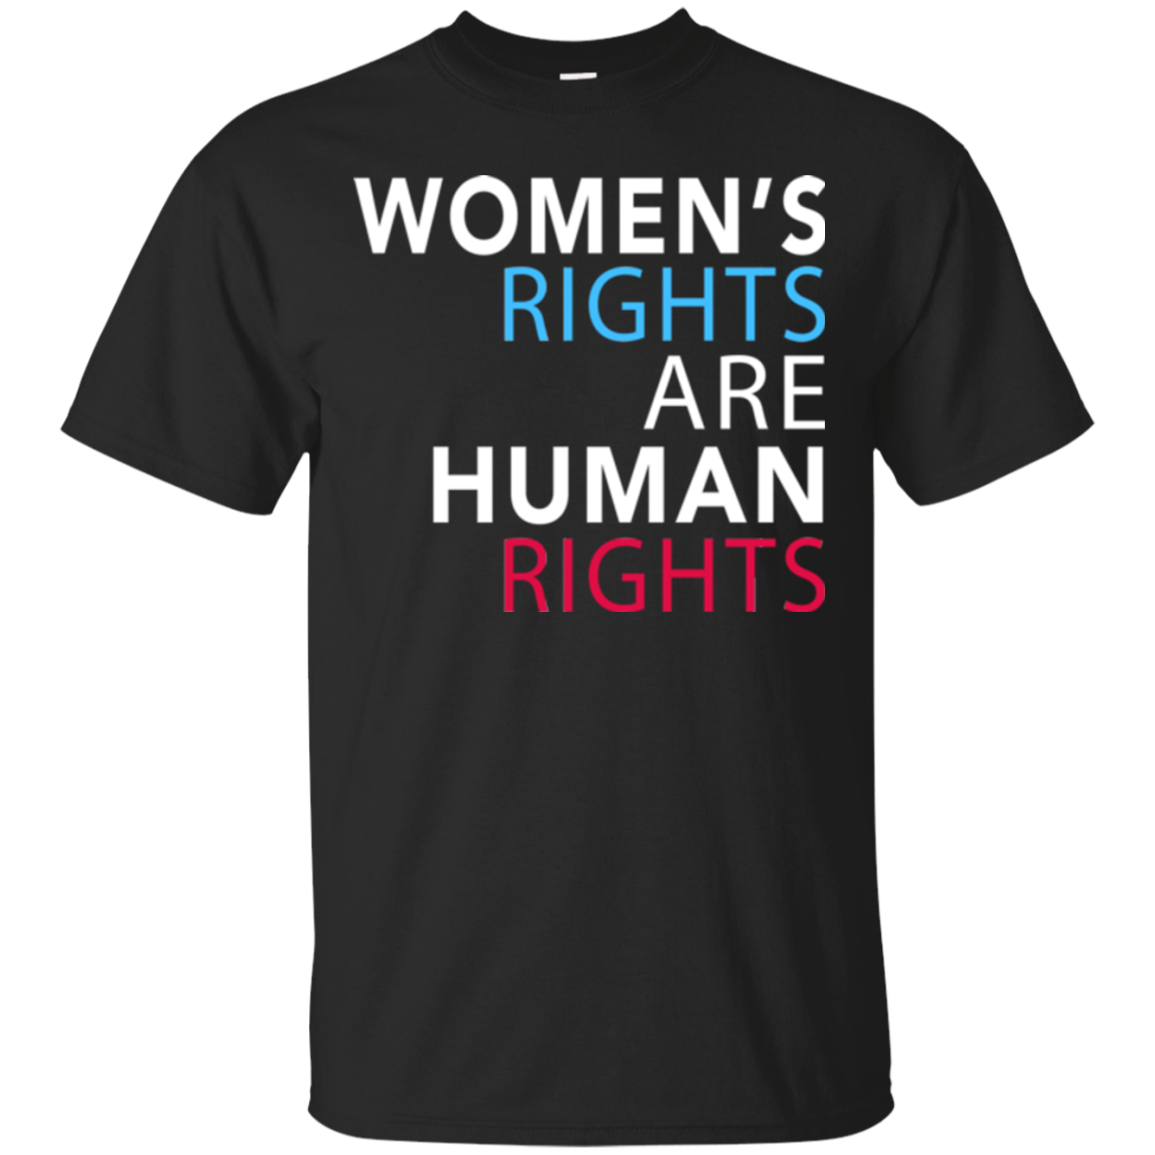 Women's Rights Are Human Rights Hillary Clinton's Shirts - Teesmiley